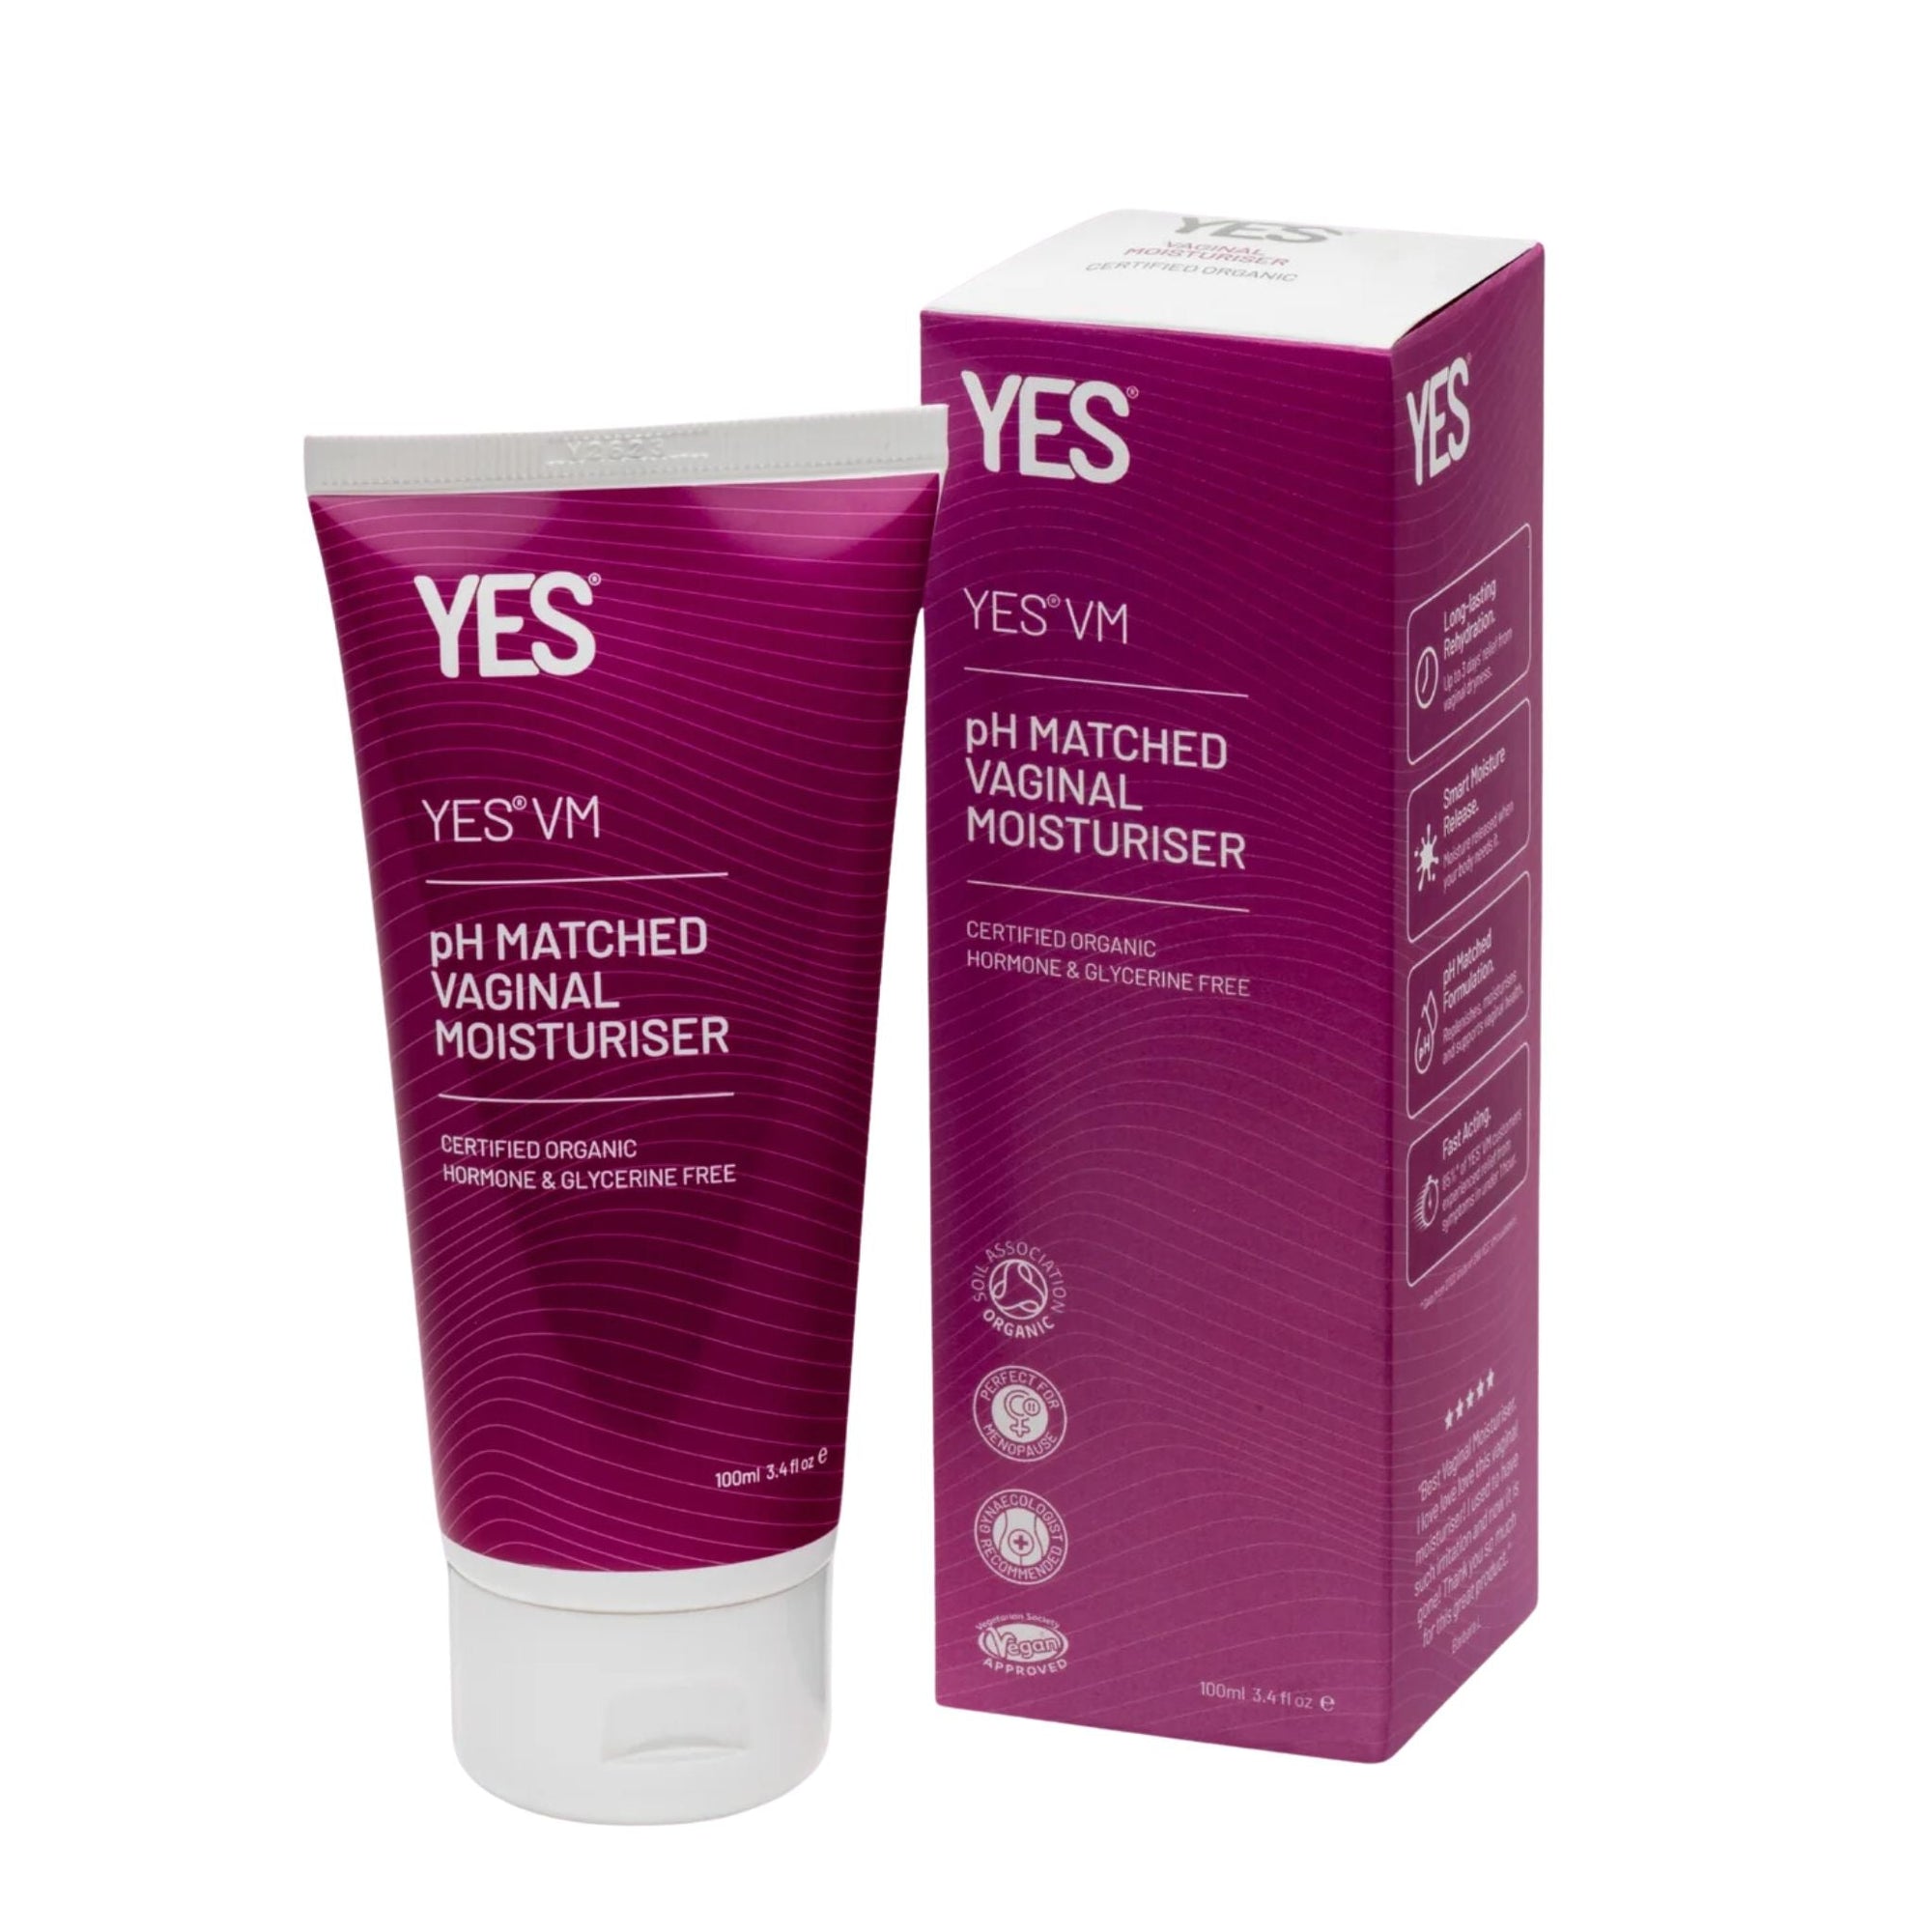 Yes - YES Natural Vaginal Moisturizer - ORESTA clean beauty simplified